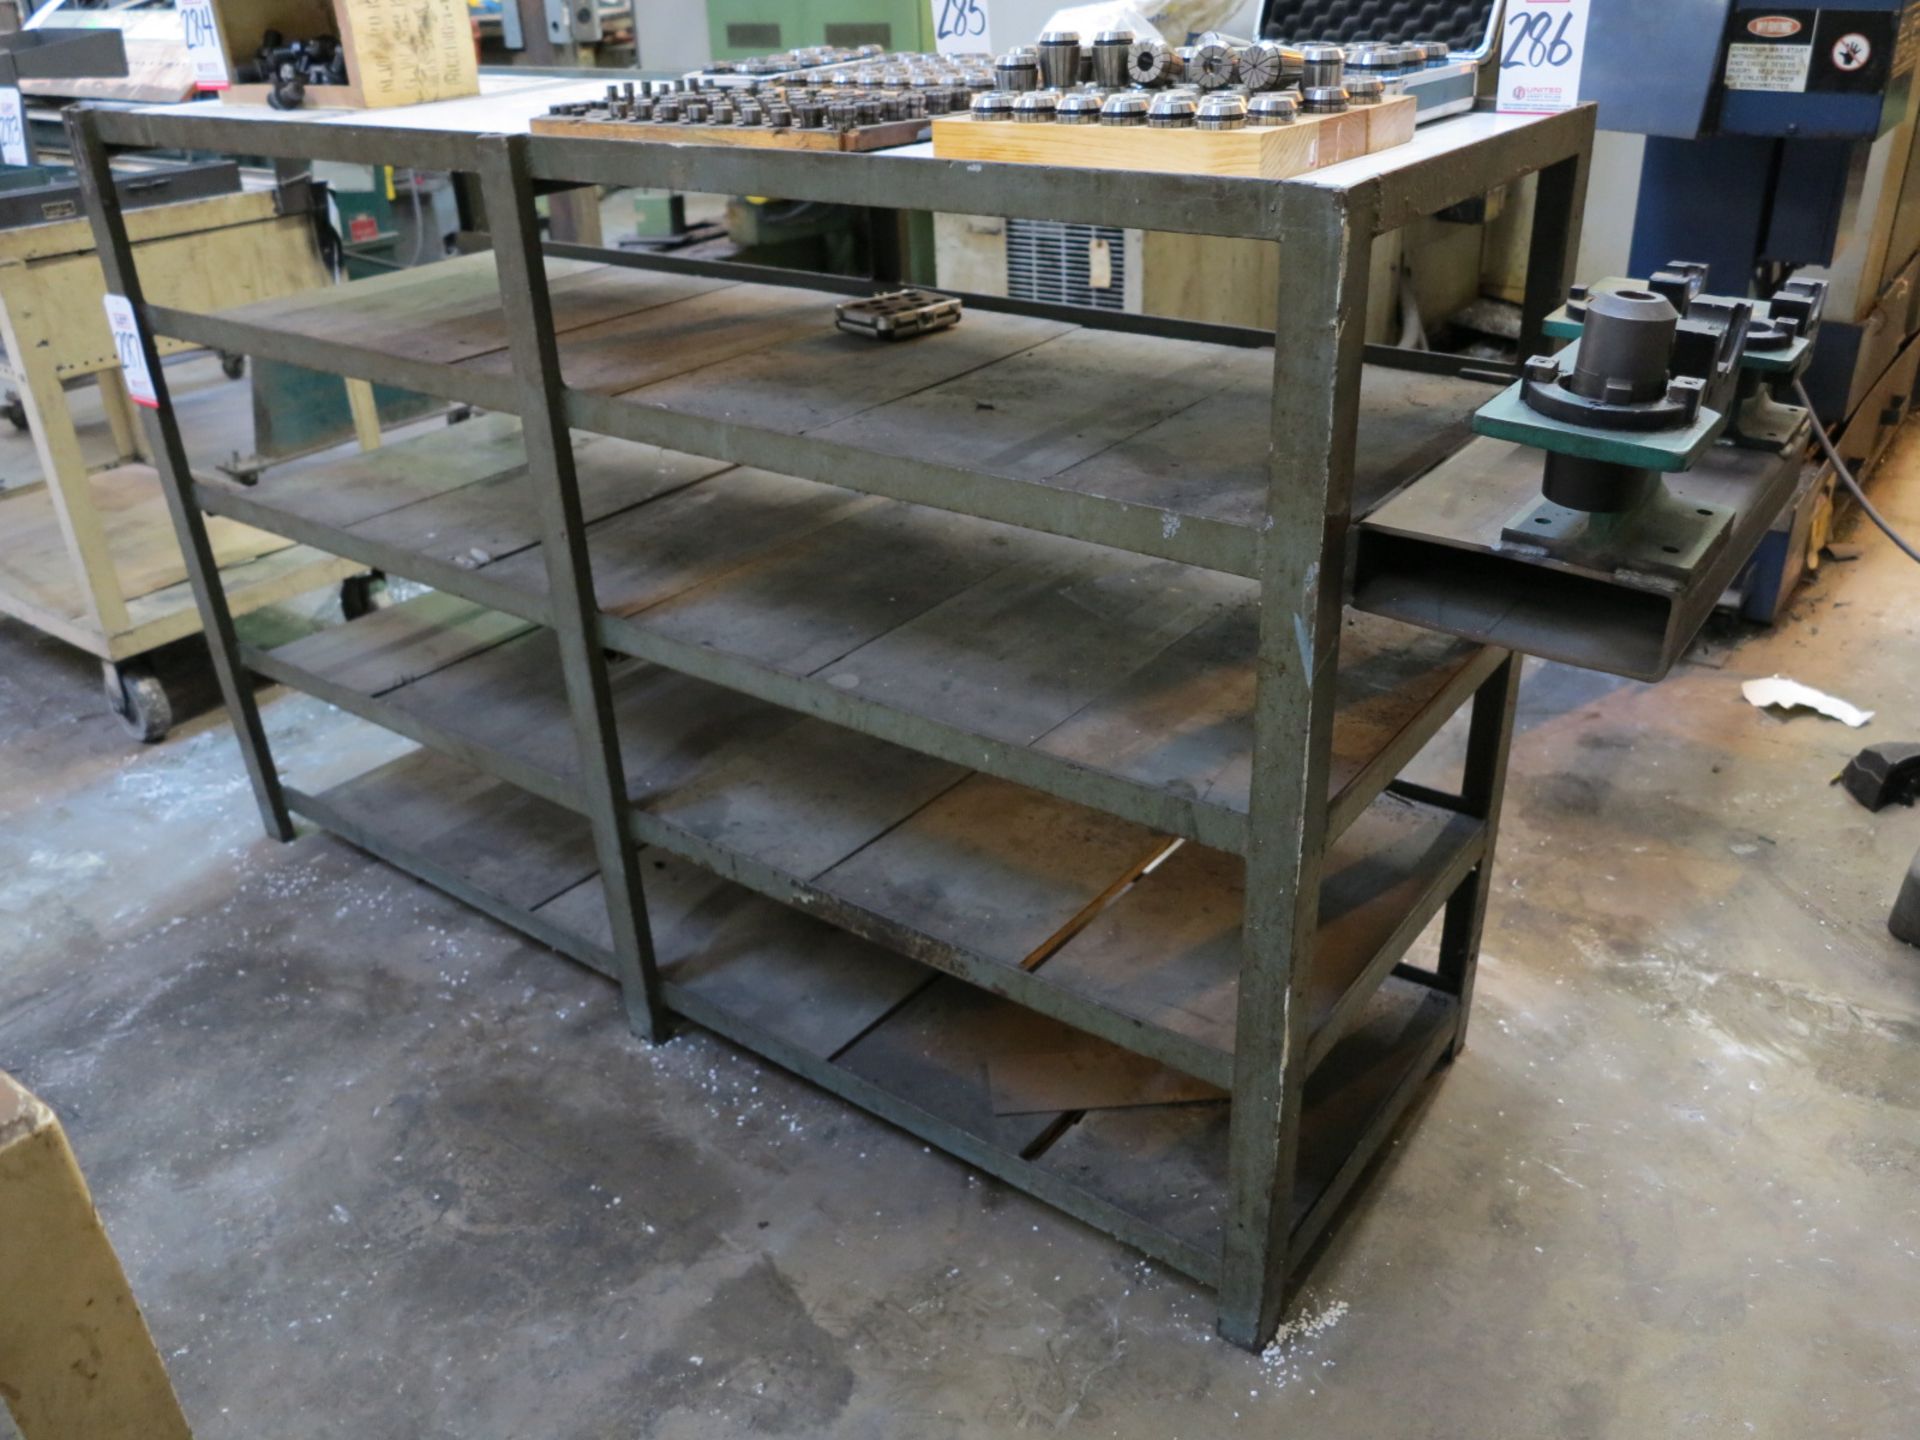 LOT - (2) SHOP CARTS AND (1) SHELF; ALL WITHOUT CONTENTS